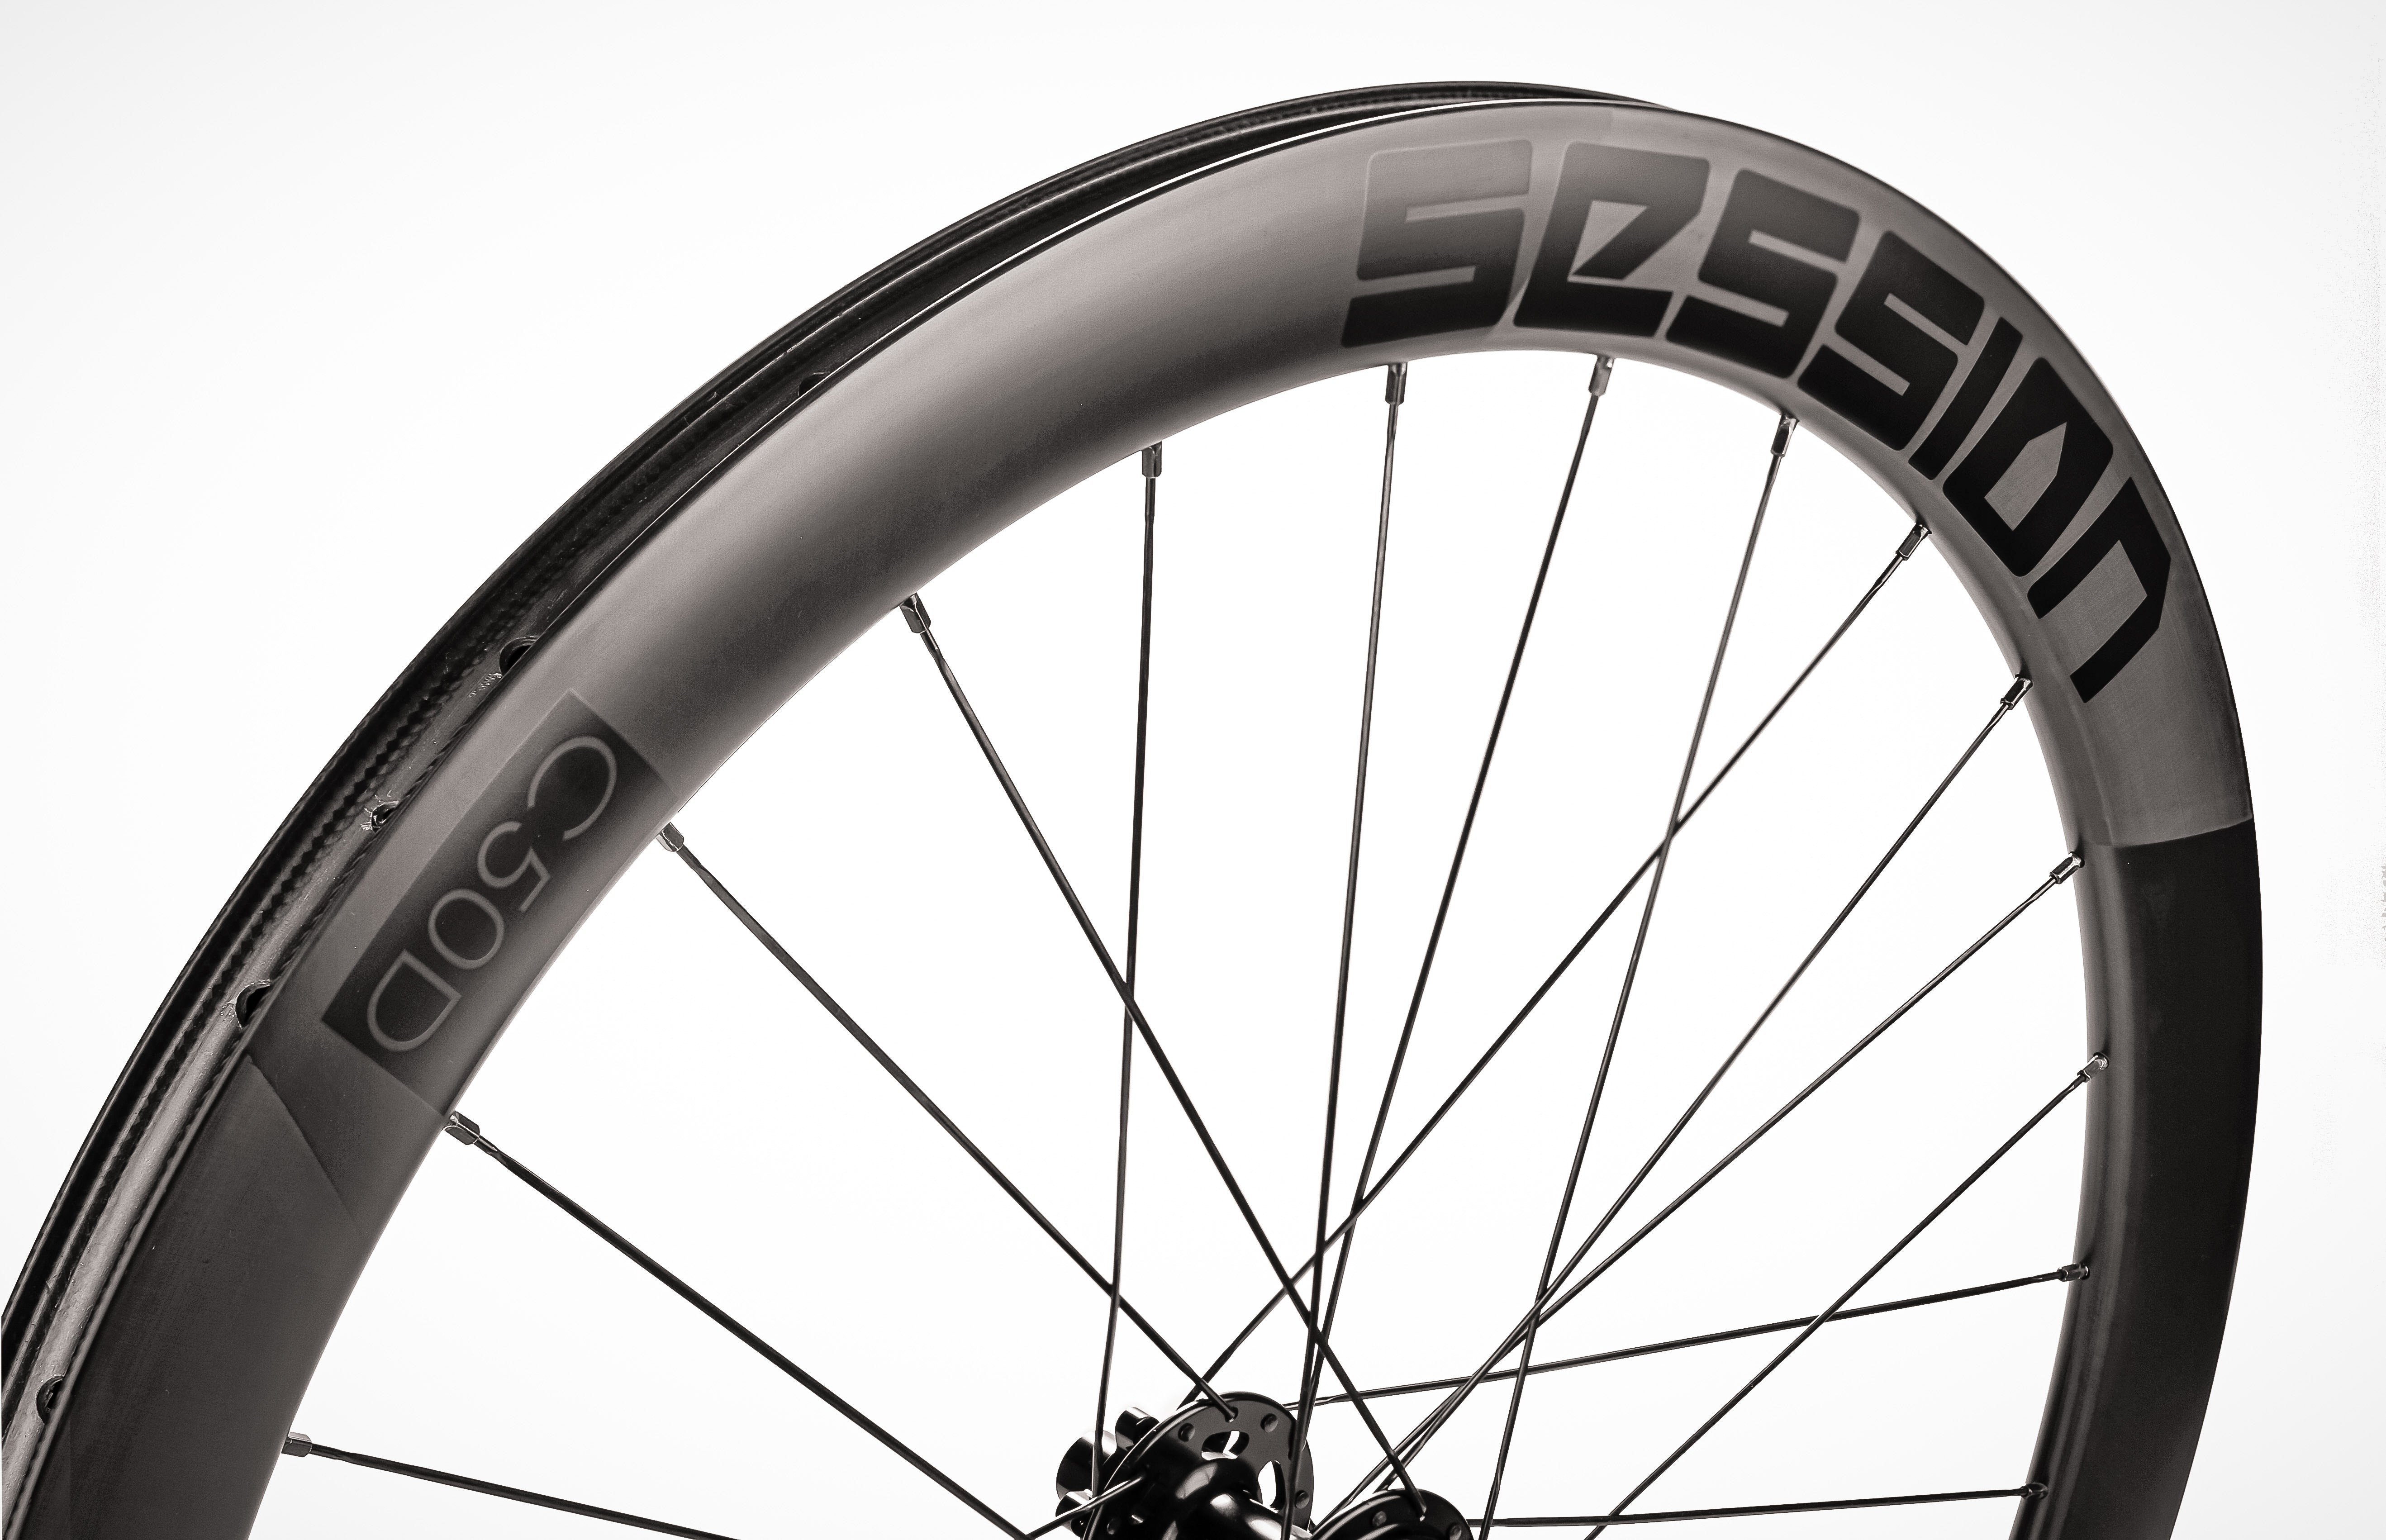 C50D Road Carbon Wheelset - Disc Brake (Front and Rear) - Session